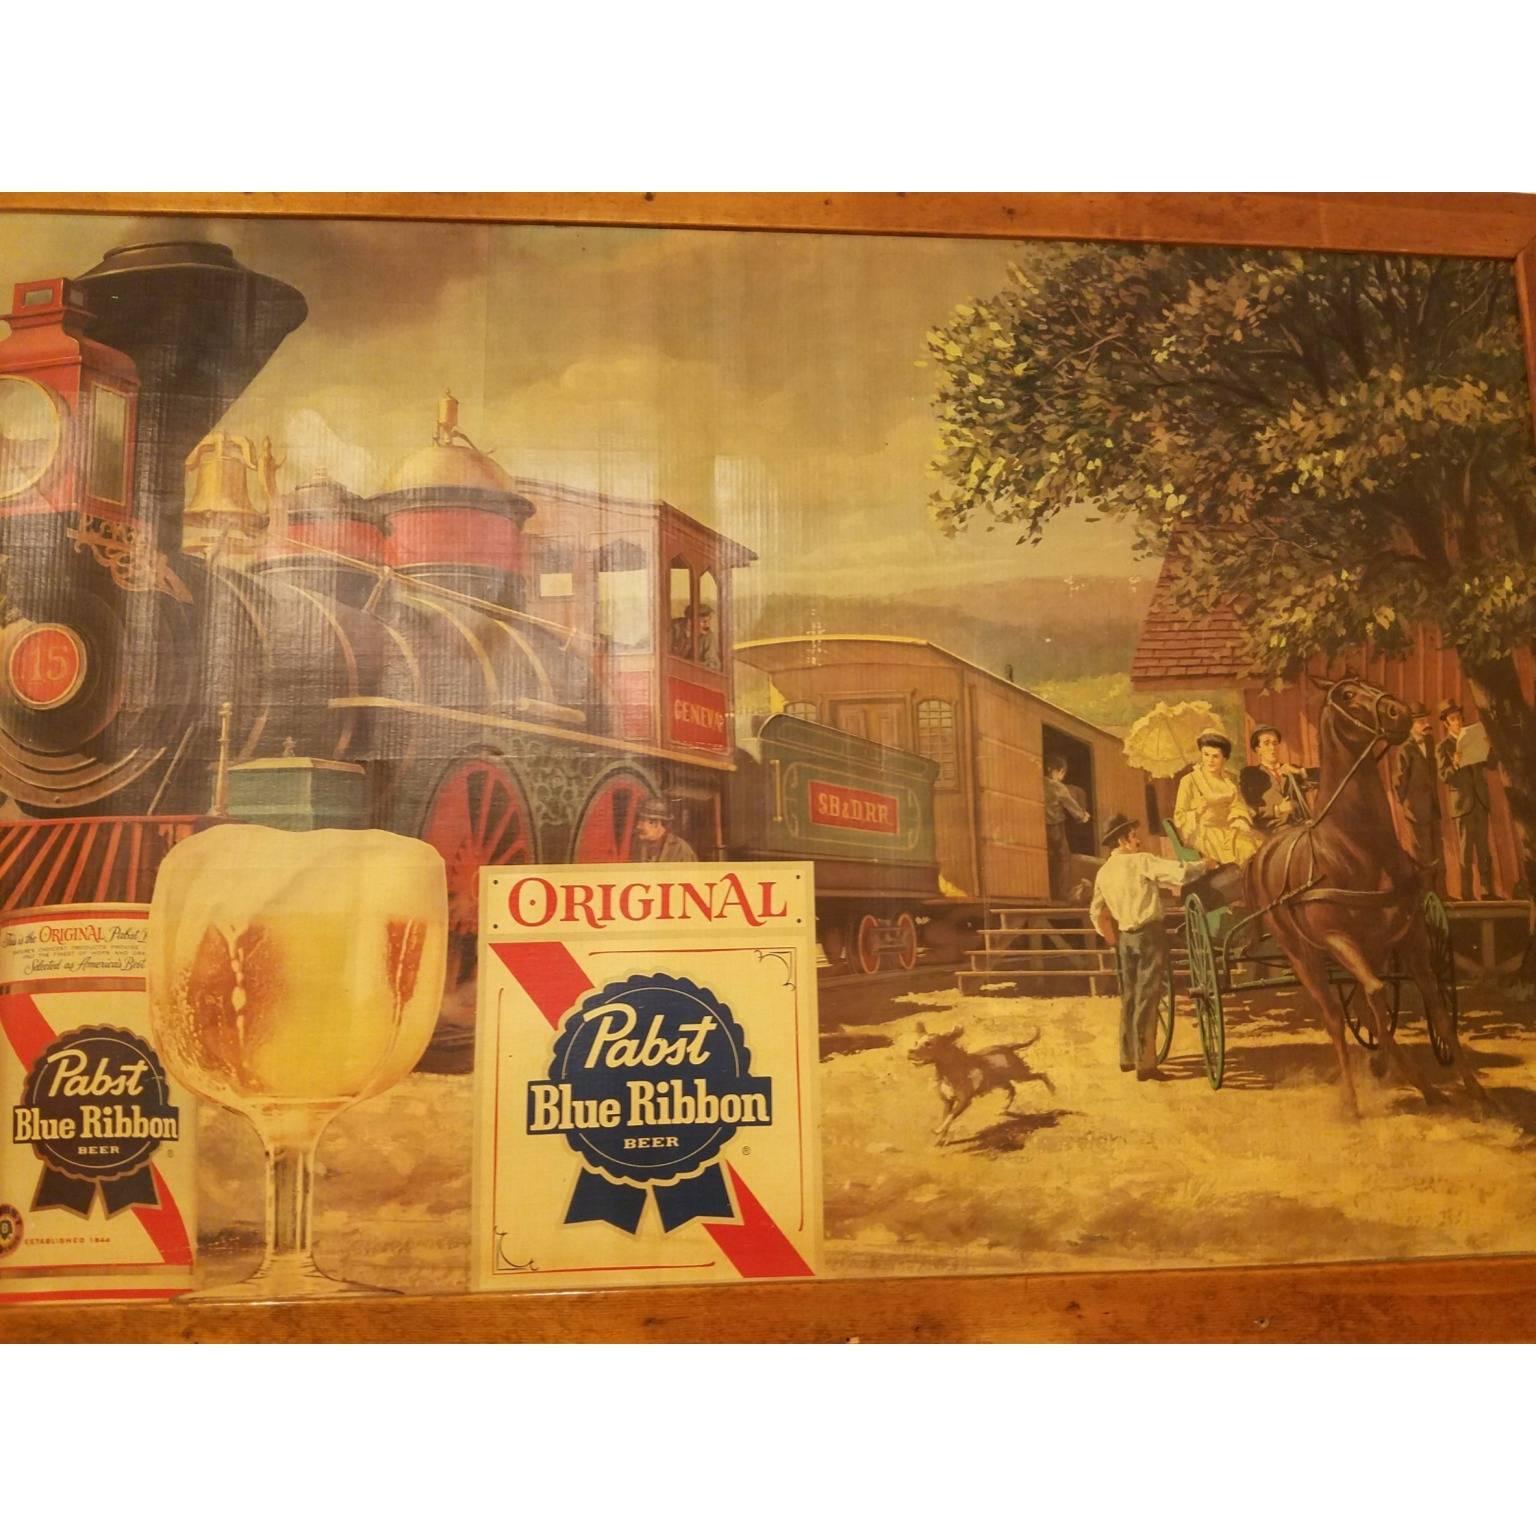 This was a large plank board that hung over the Beer department in a small grocery store in the 1960s. This has no glass over it. It is in great condition. I posted some pictures of the few scratches it does have. This has a slight crease to the